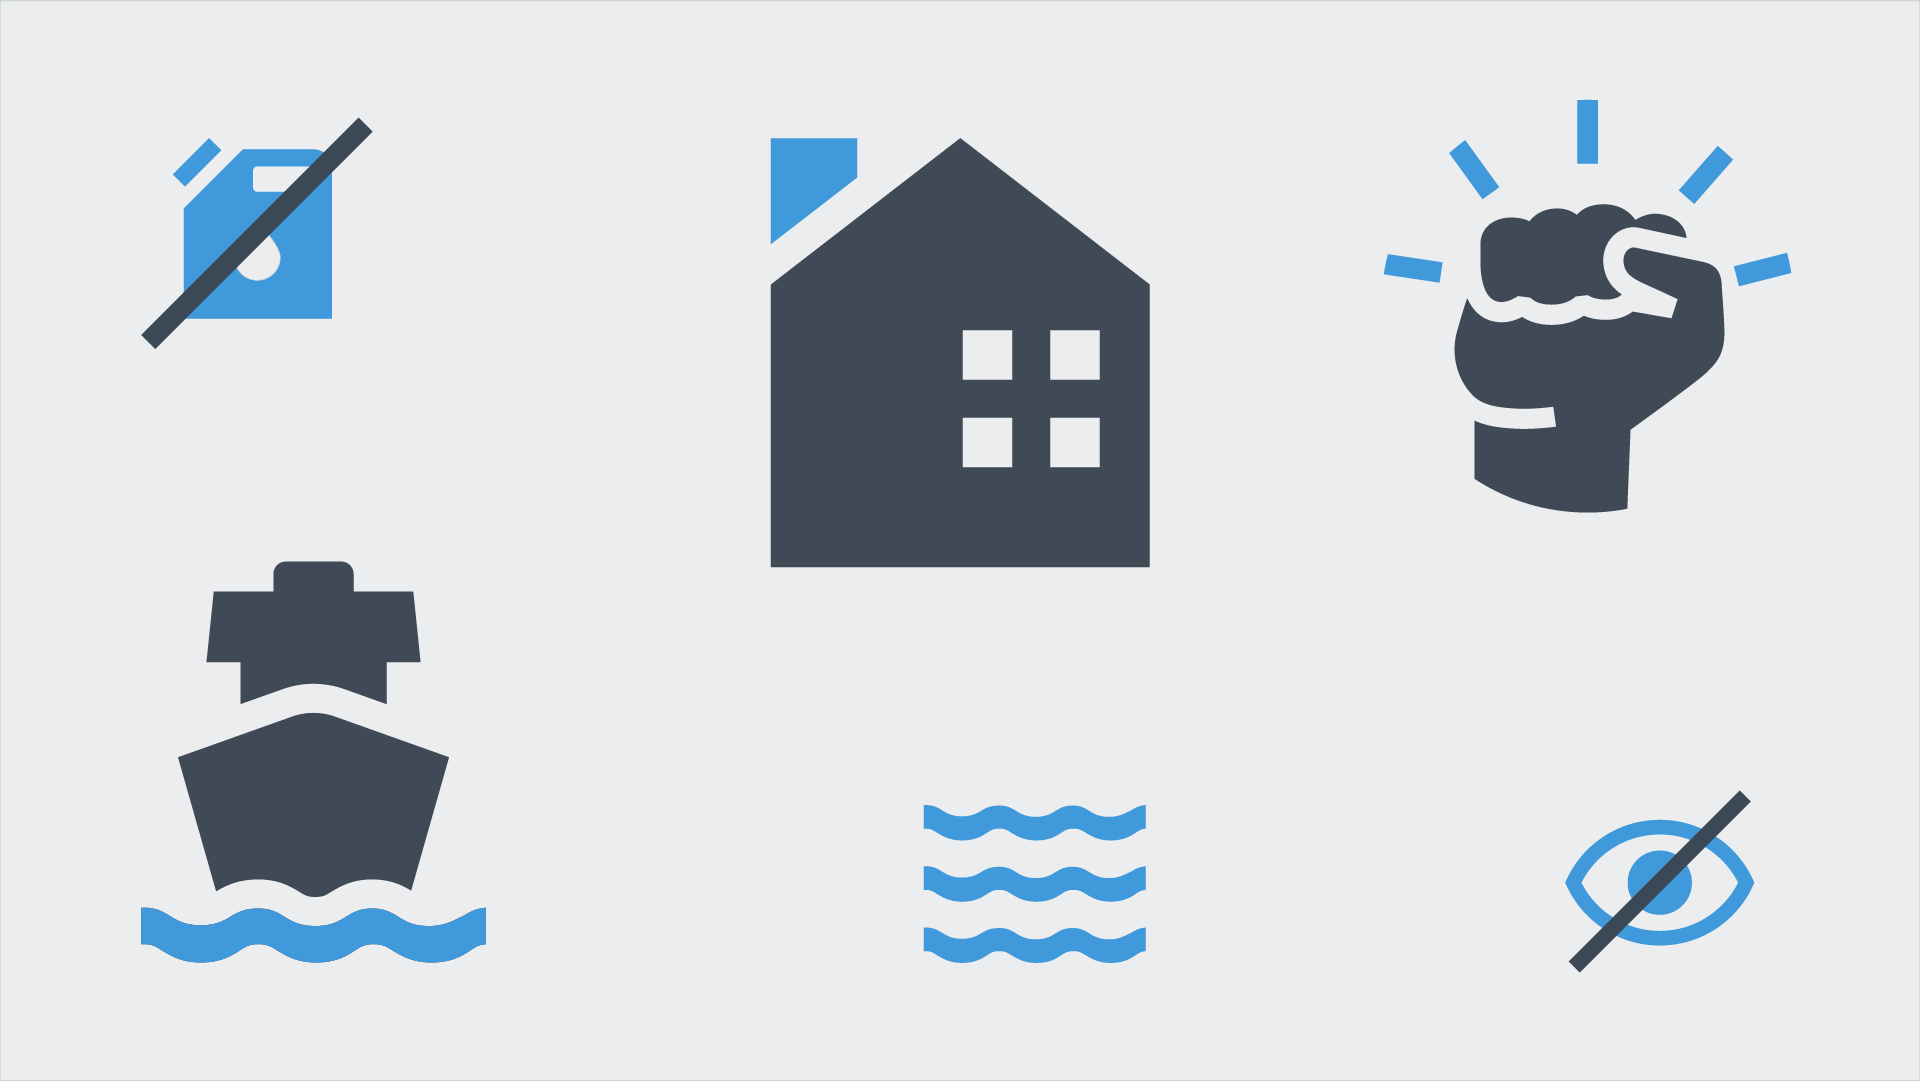 Pictograms of water, a ship, a house, gas, a fist, and an eye show the benefits of offshore wind in the energy transition.